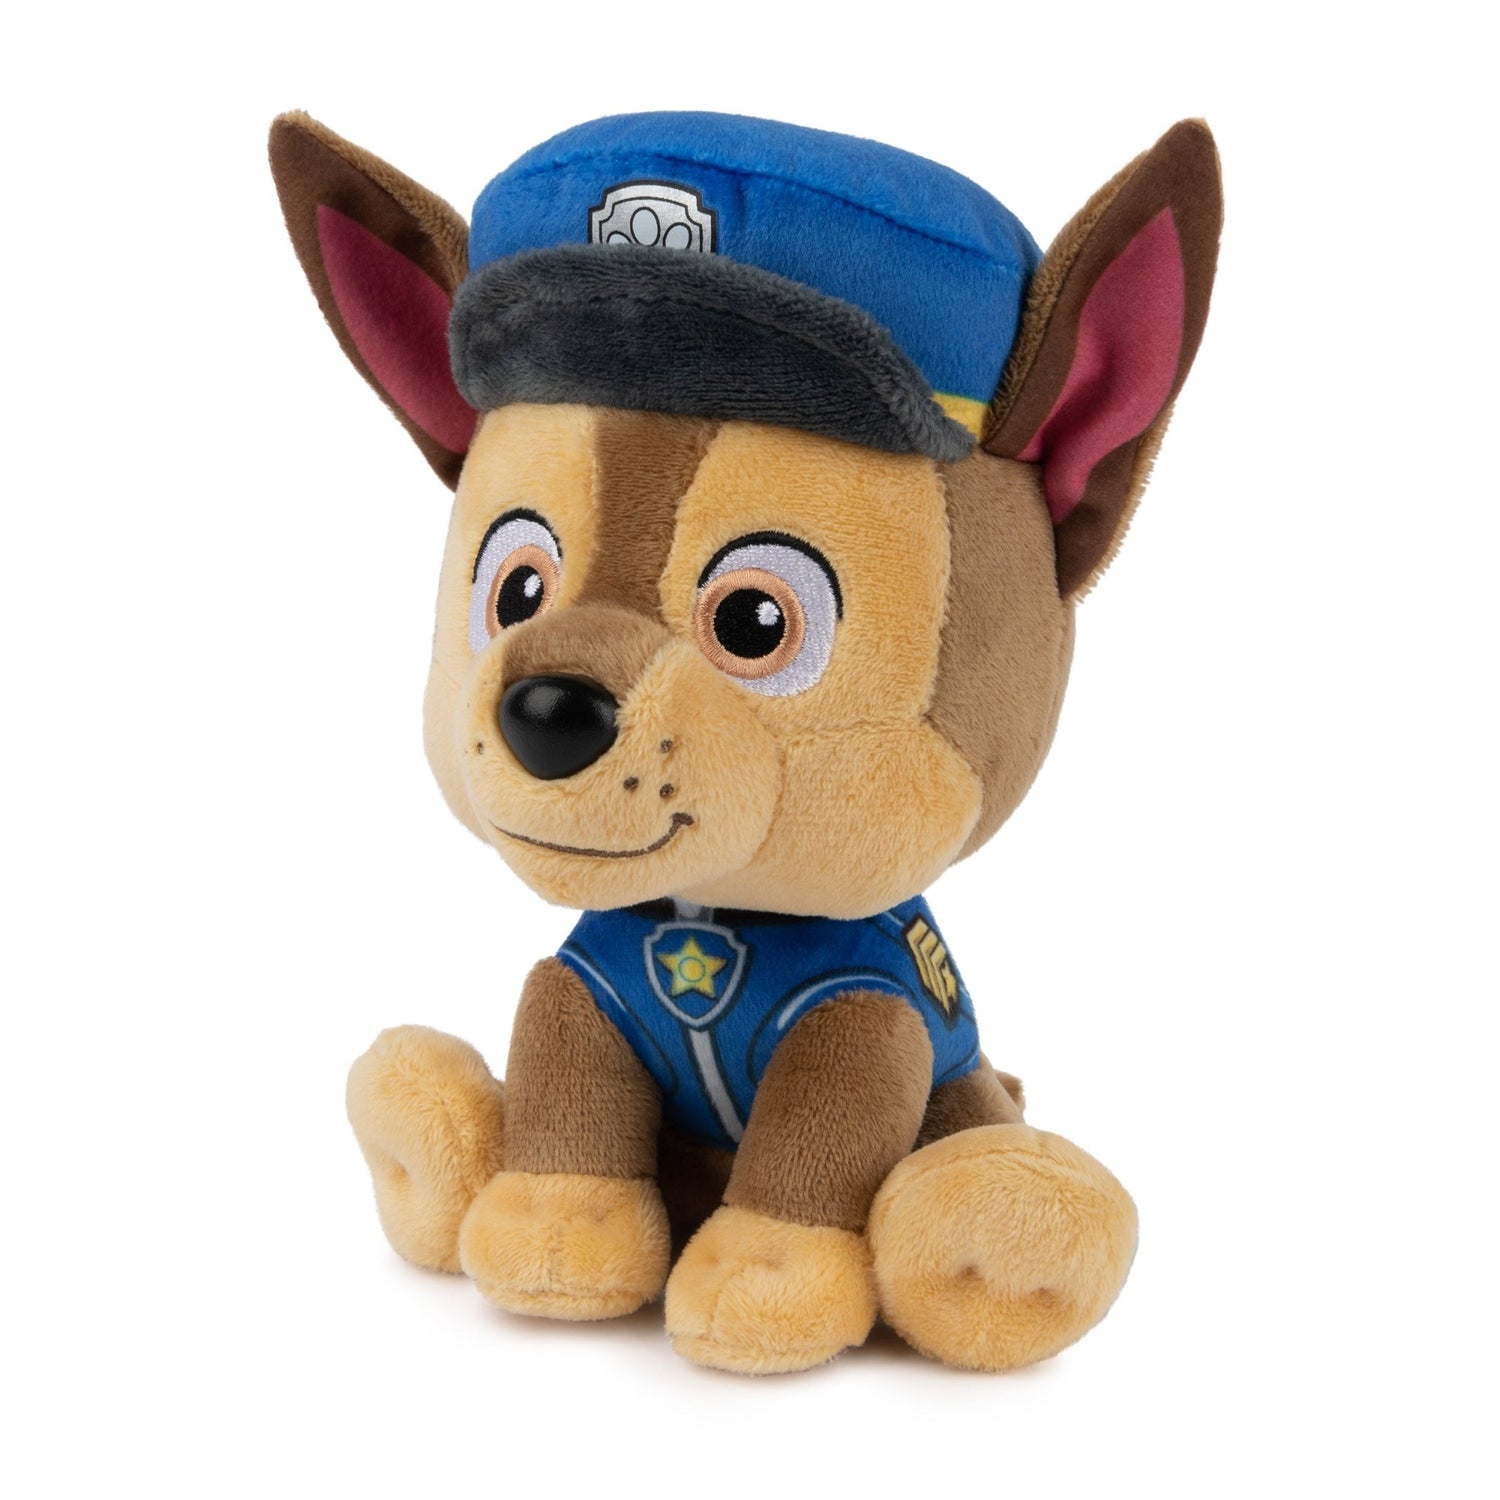 GUND Official PAW Patrol Chase in Signature Police Officer Uniform Plush Toy, Stuffed Animal for Ages 1 and Up, 6" - Paramount Shop